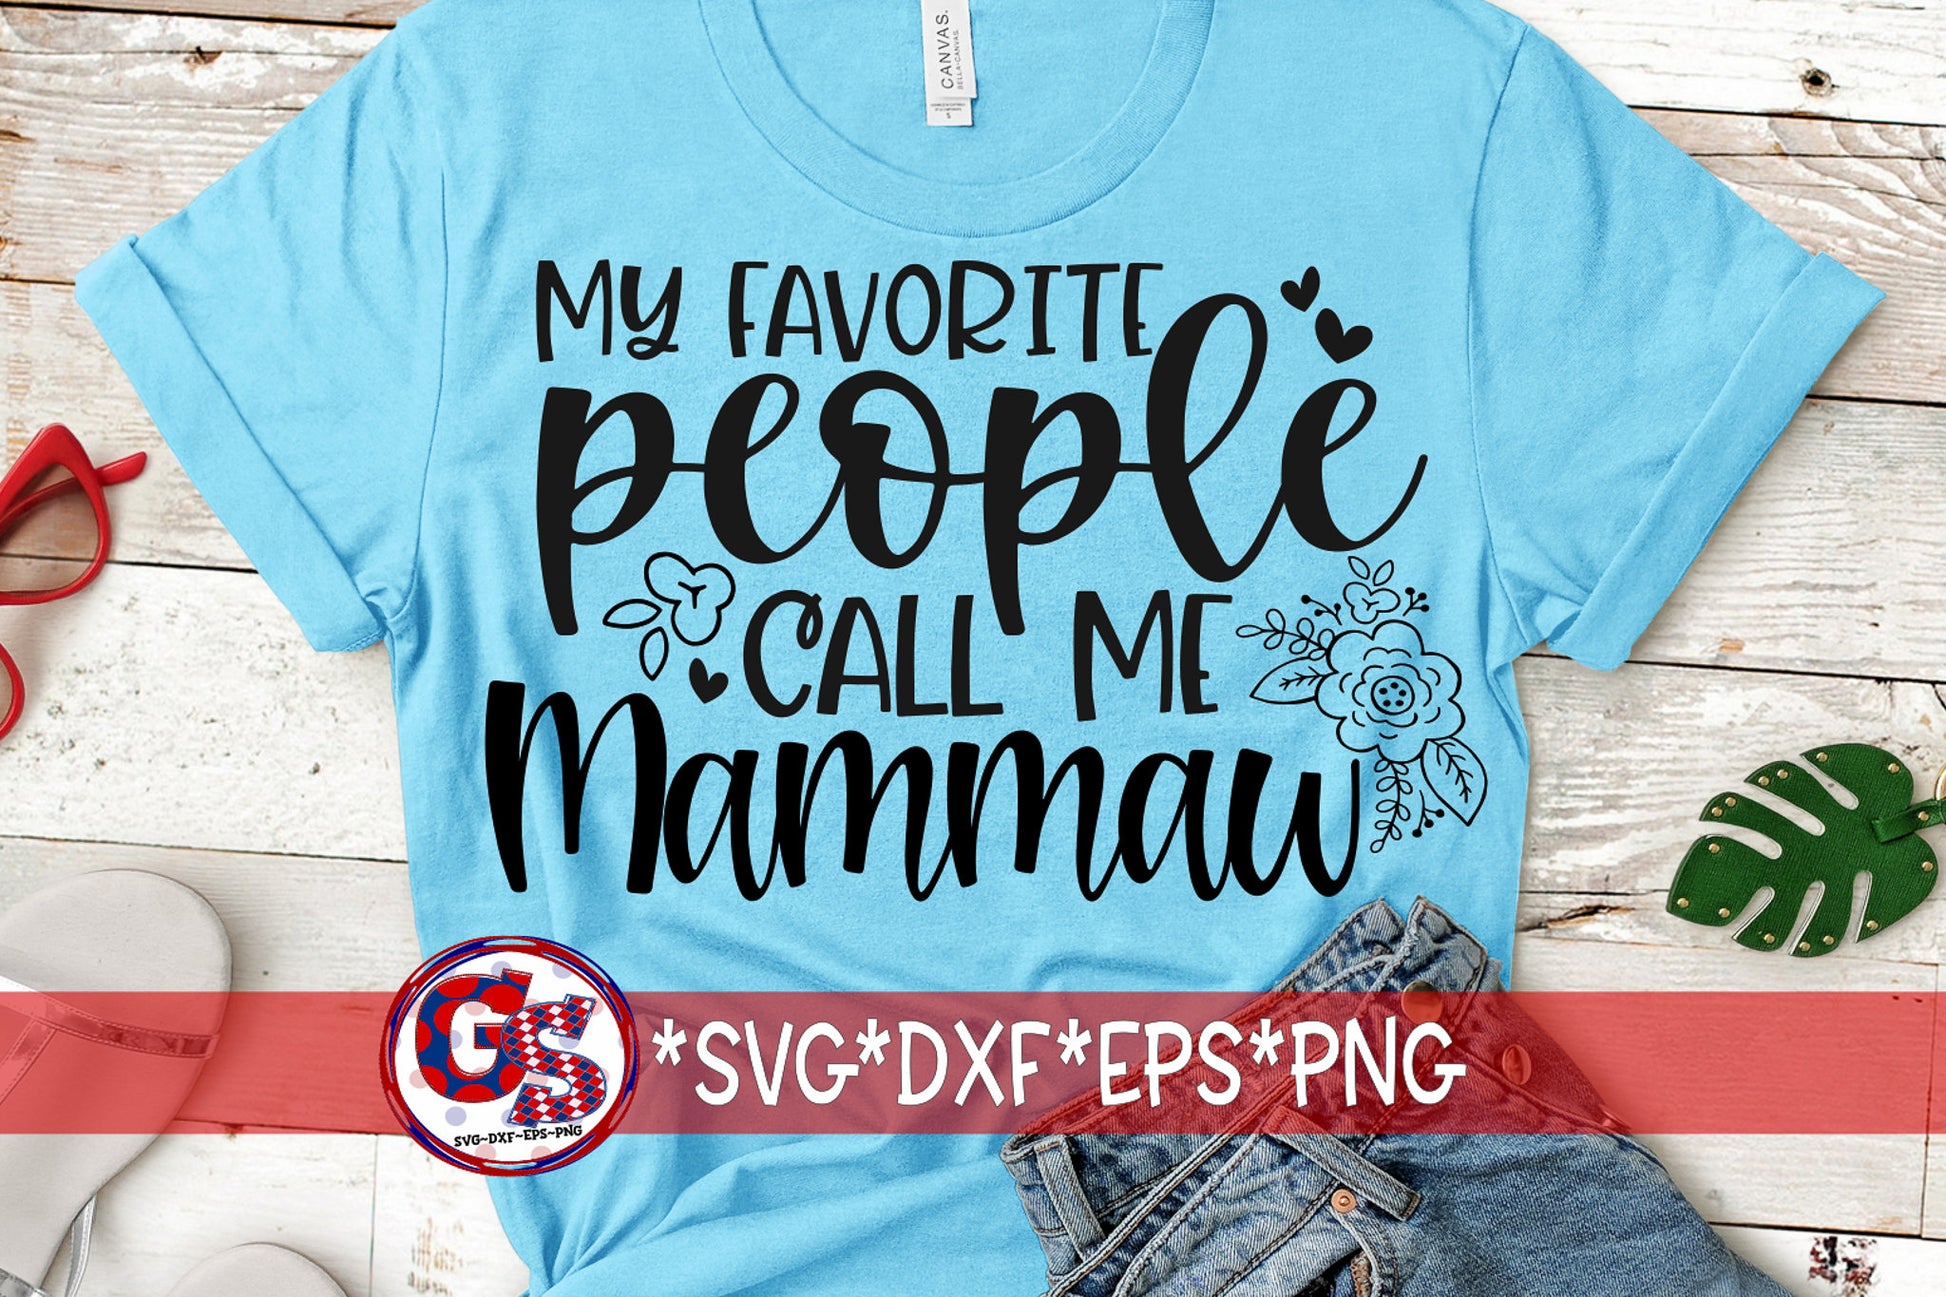 My Favorite People Call Me Mammaw svg dxf eps png | Mother&#39;s Day SVG | Mammaw SVG | Call Me Mammaw svg | Instant Download Cut File.